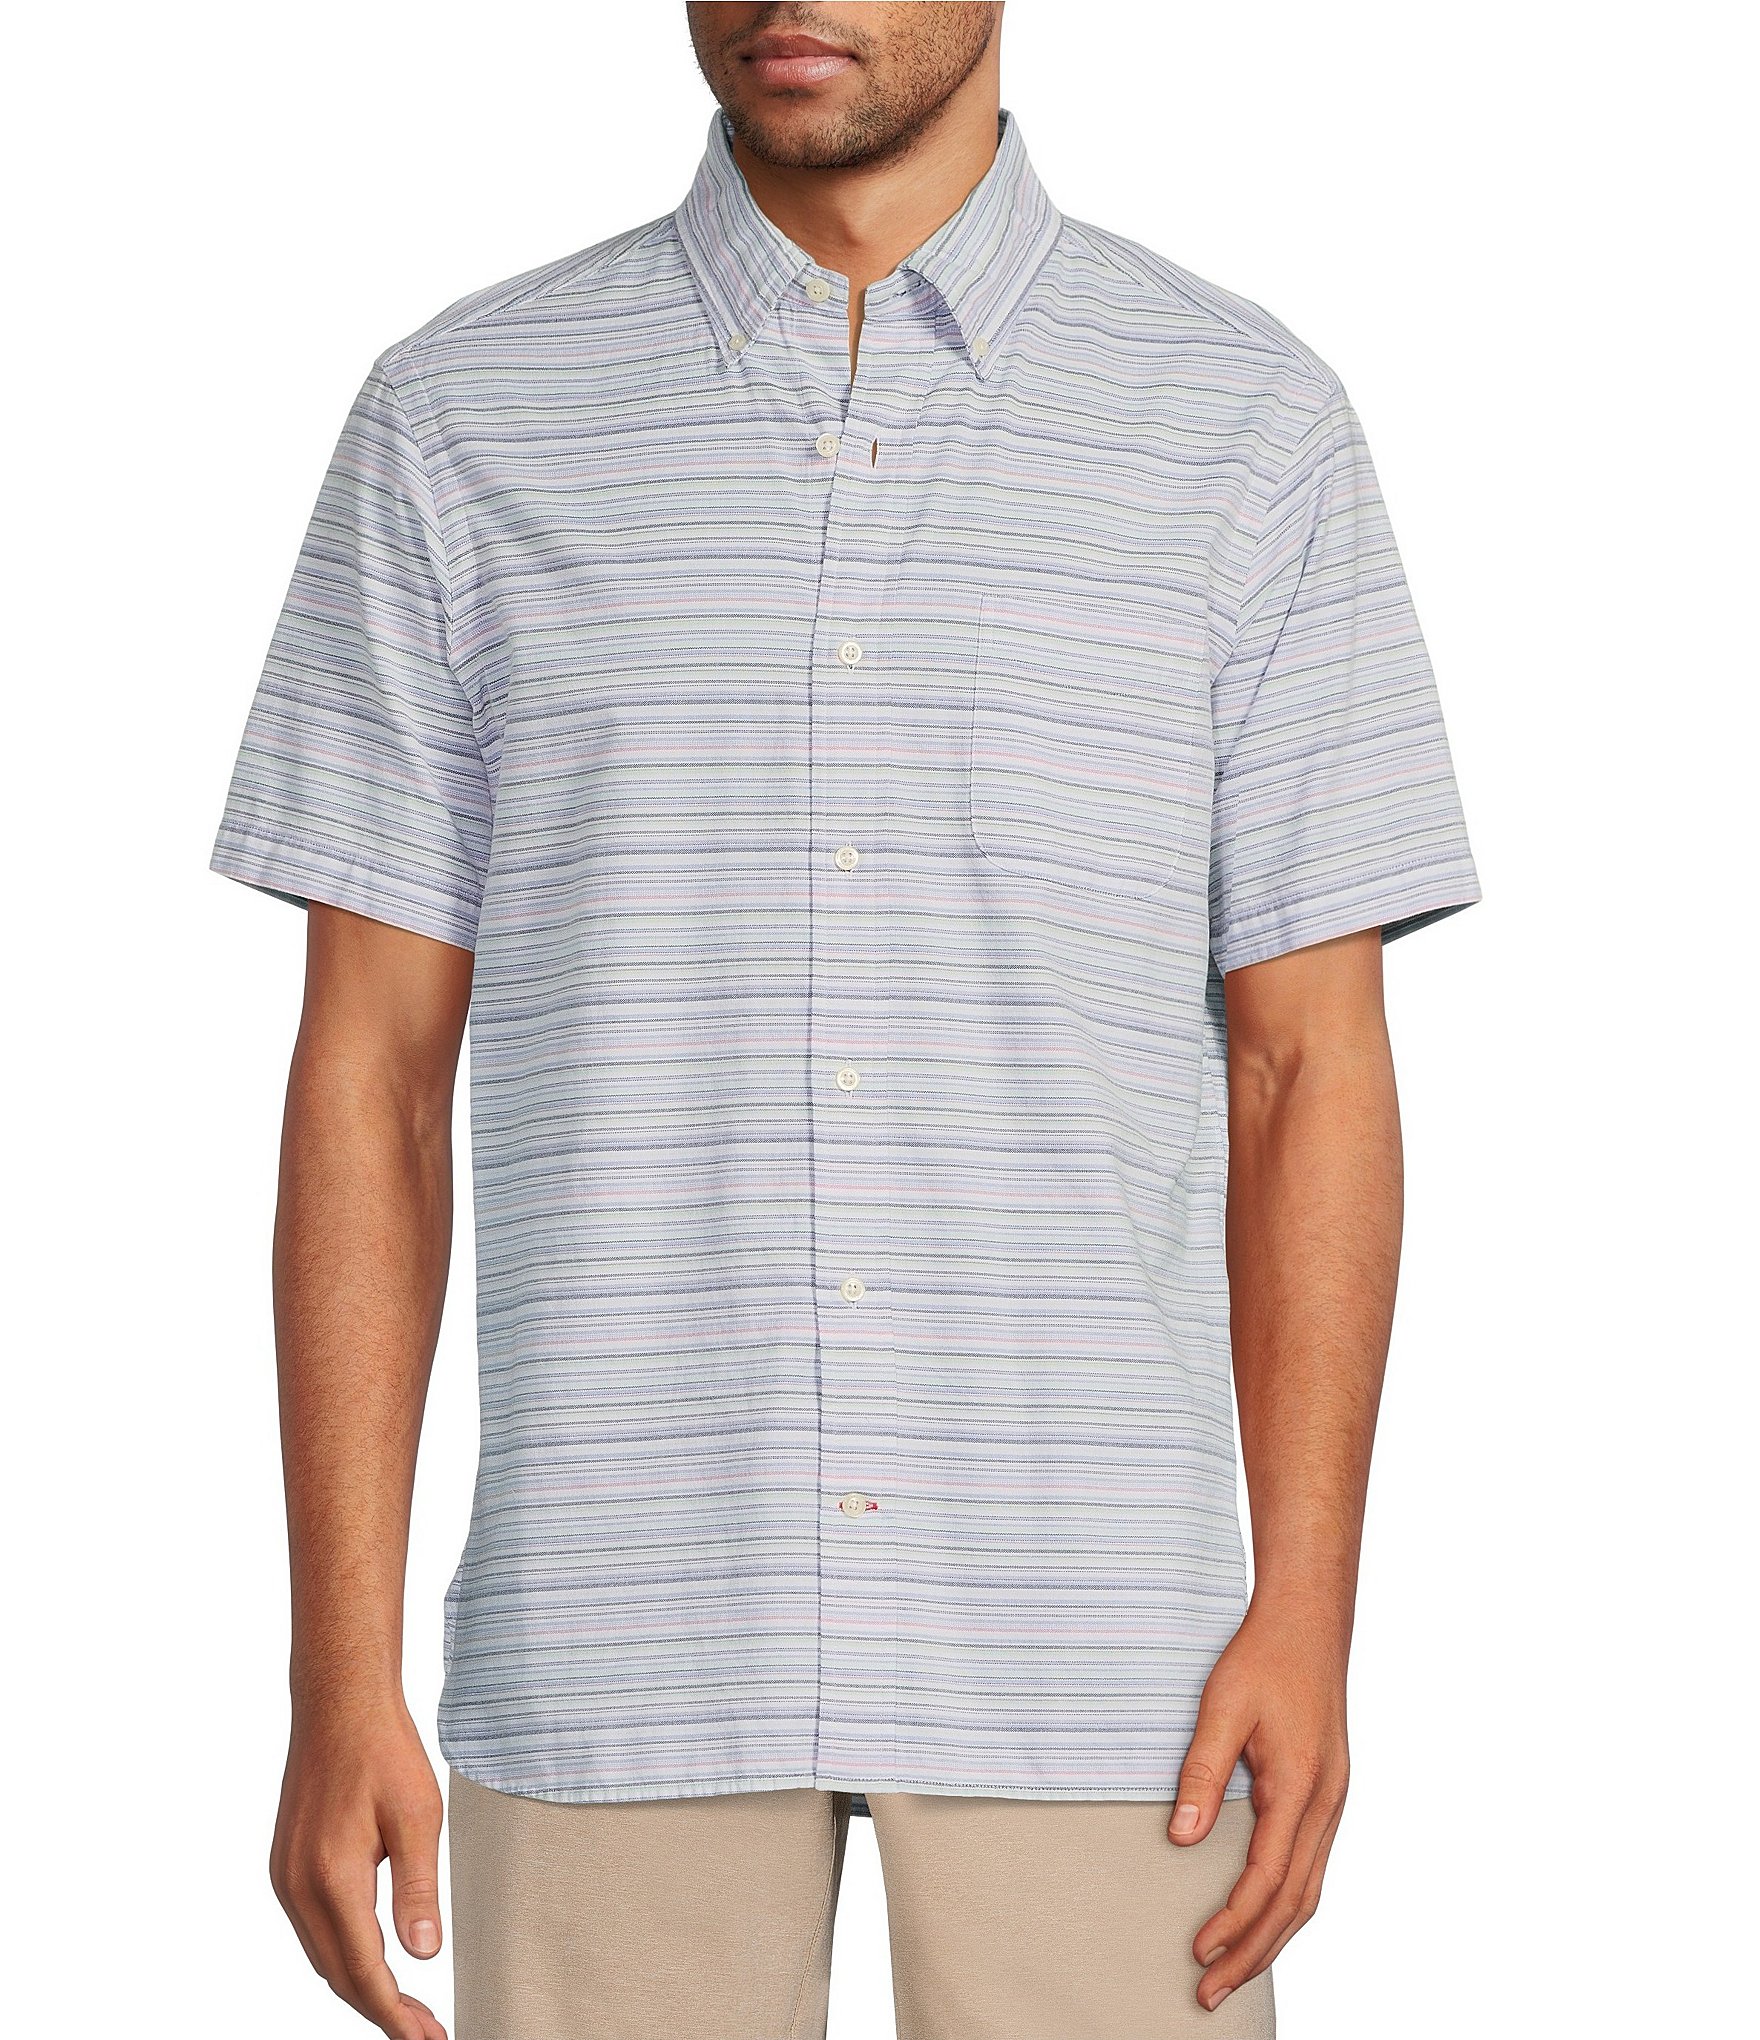 Cremieux Blue Label Striped Oxford Lucent White Short-Sleeve Woven ...